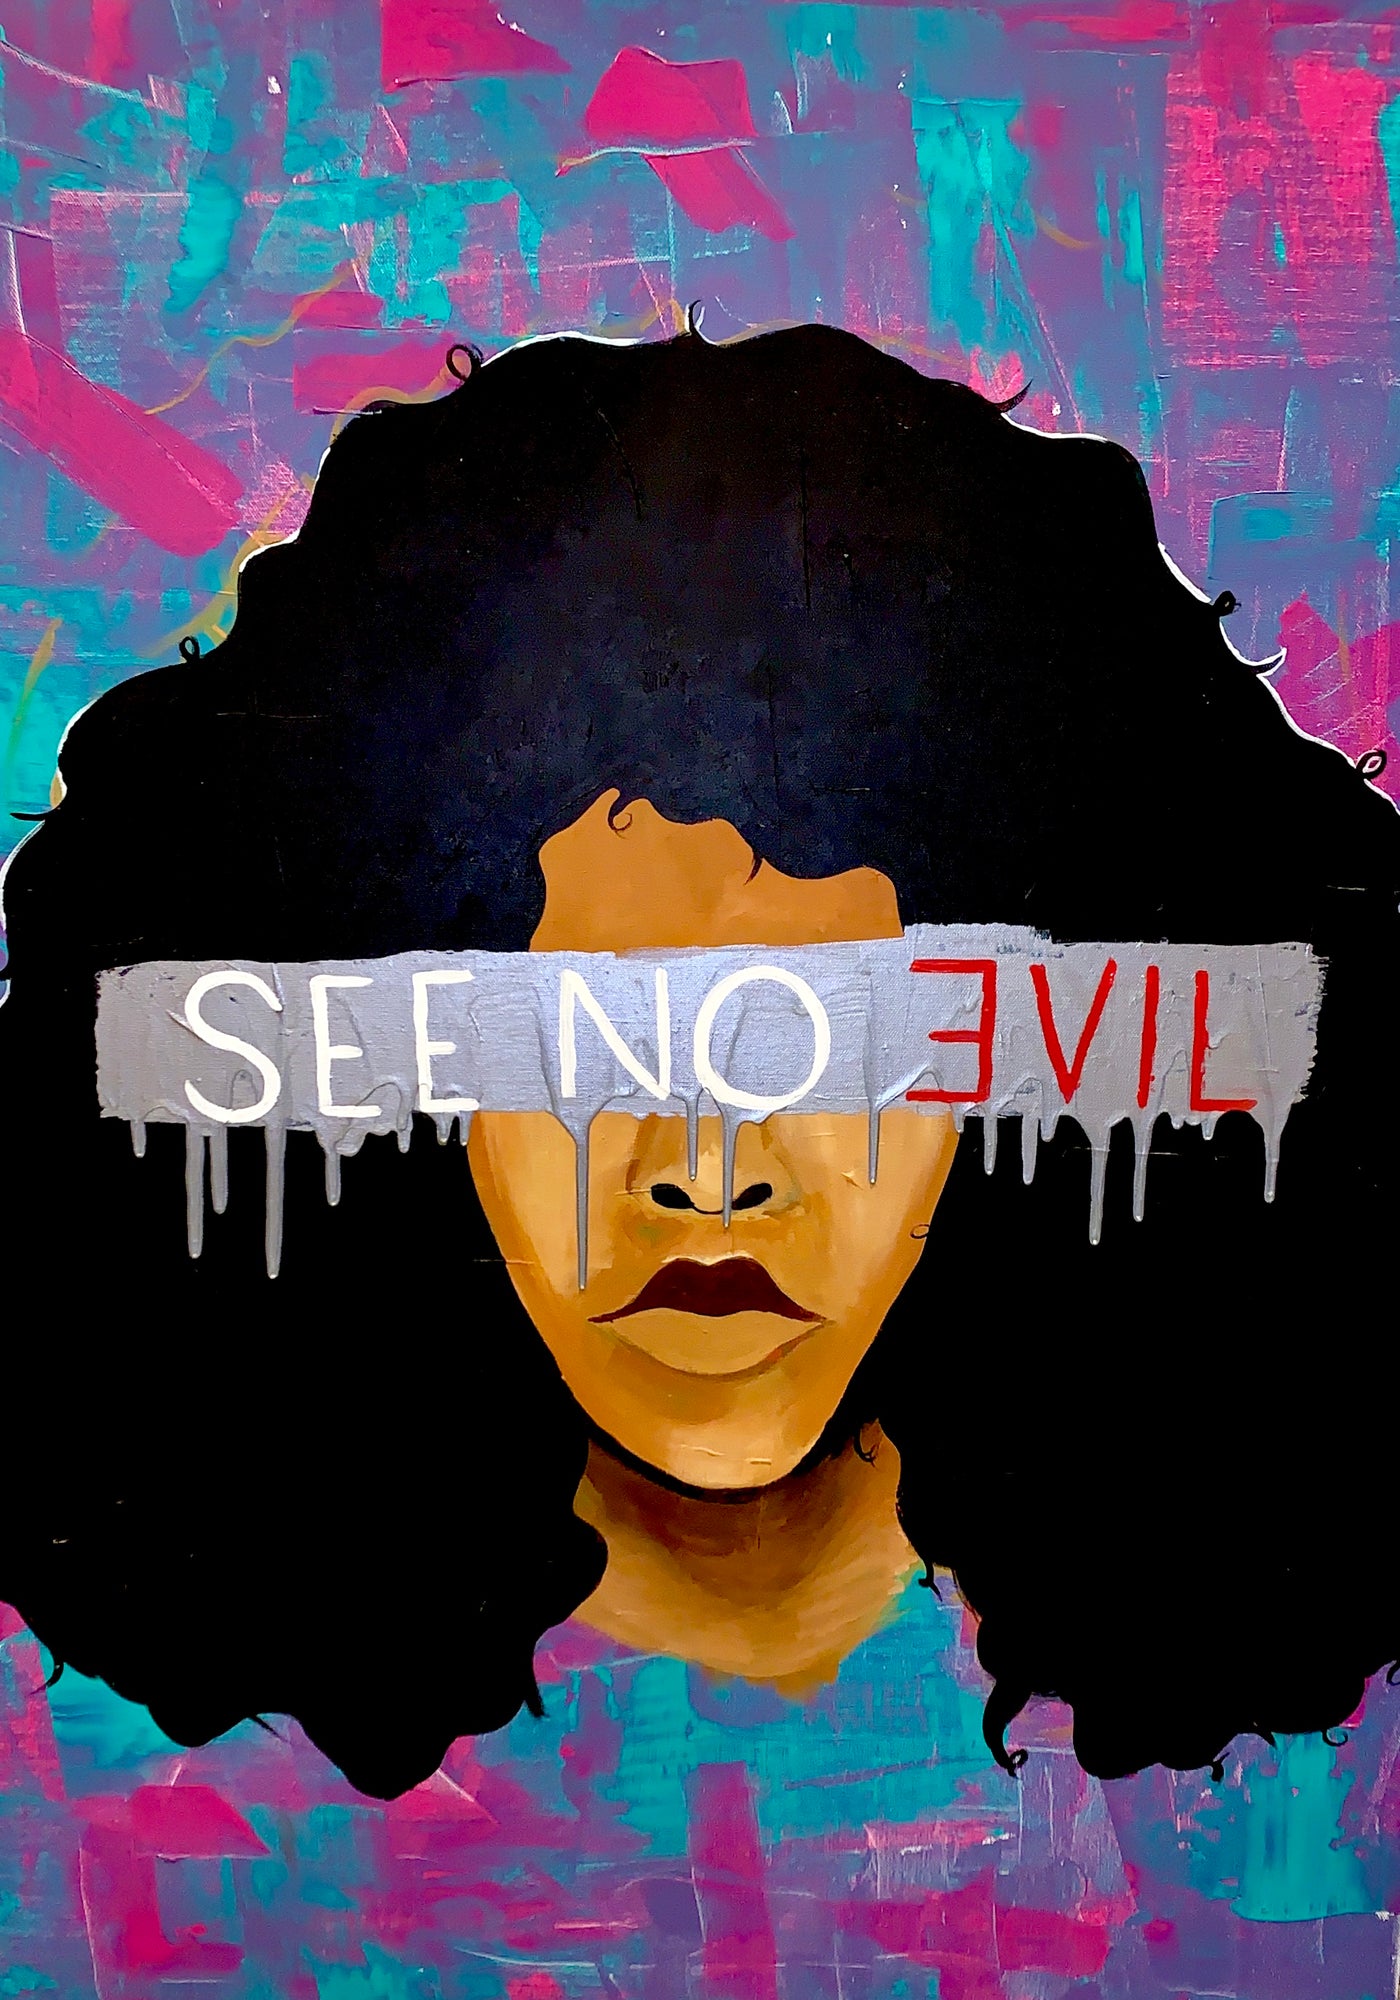 "See No EVIL" painting